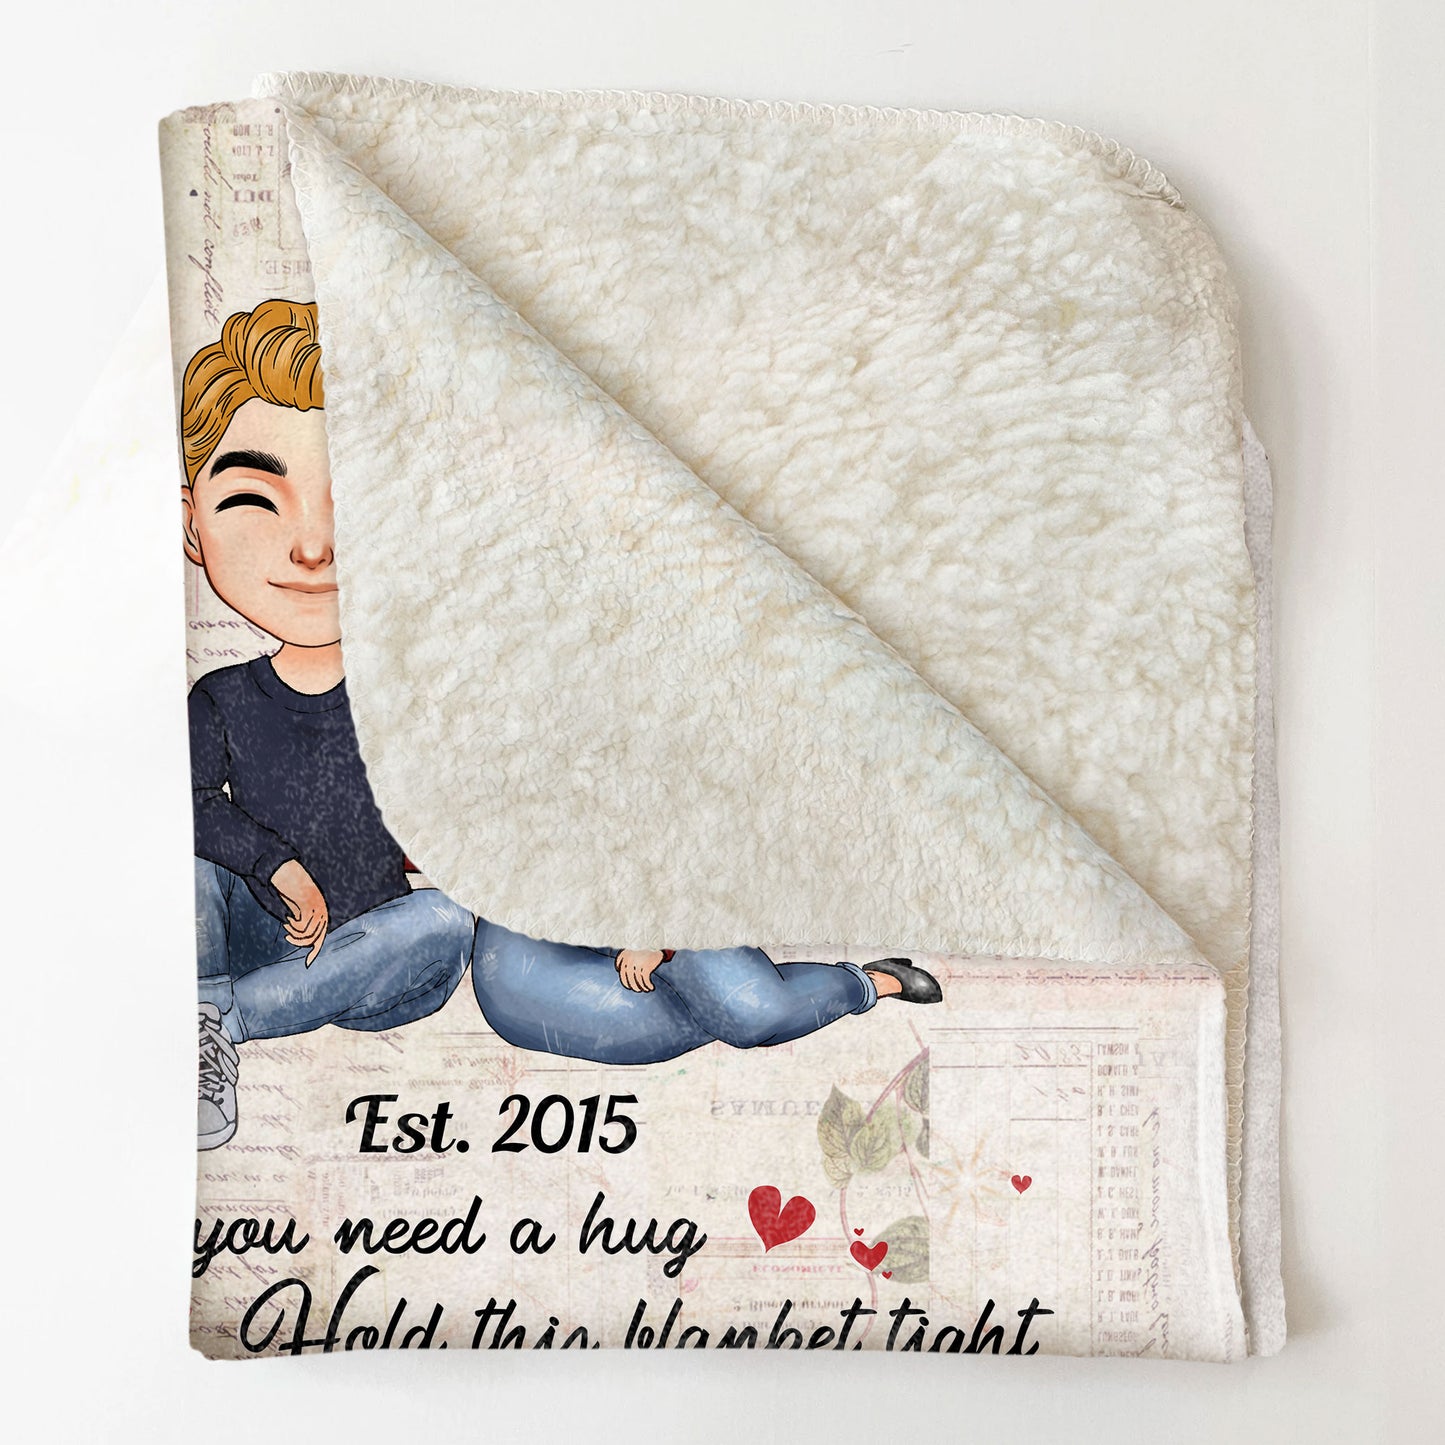 I Loved You Then, I Love You Still - Personalized Blanket